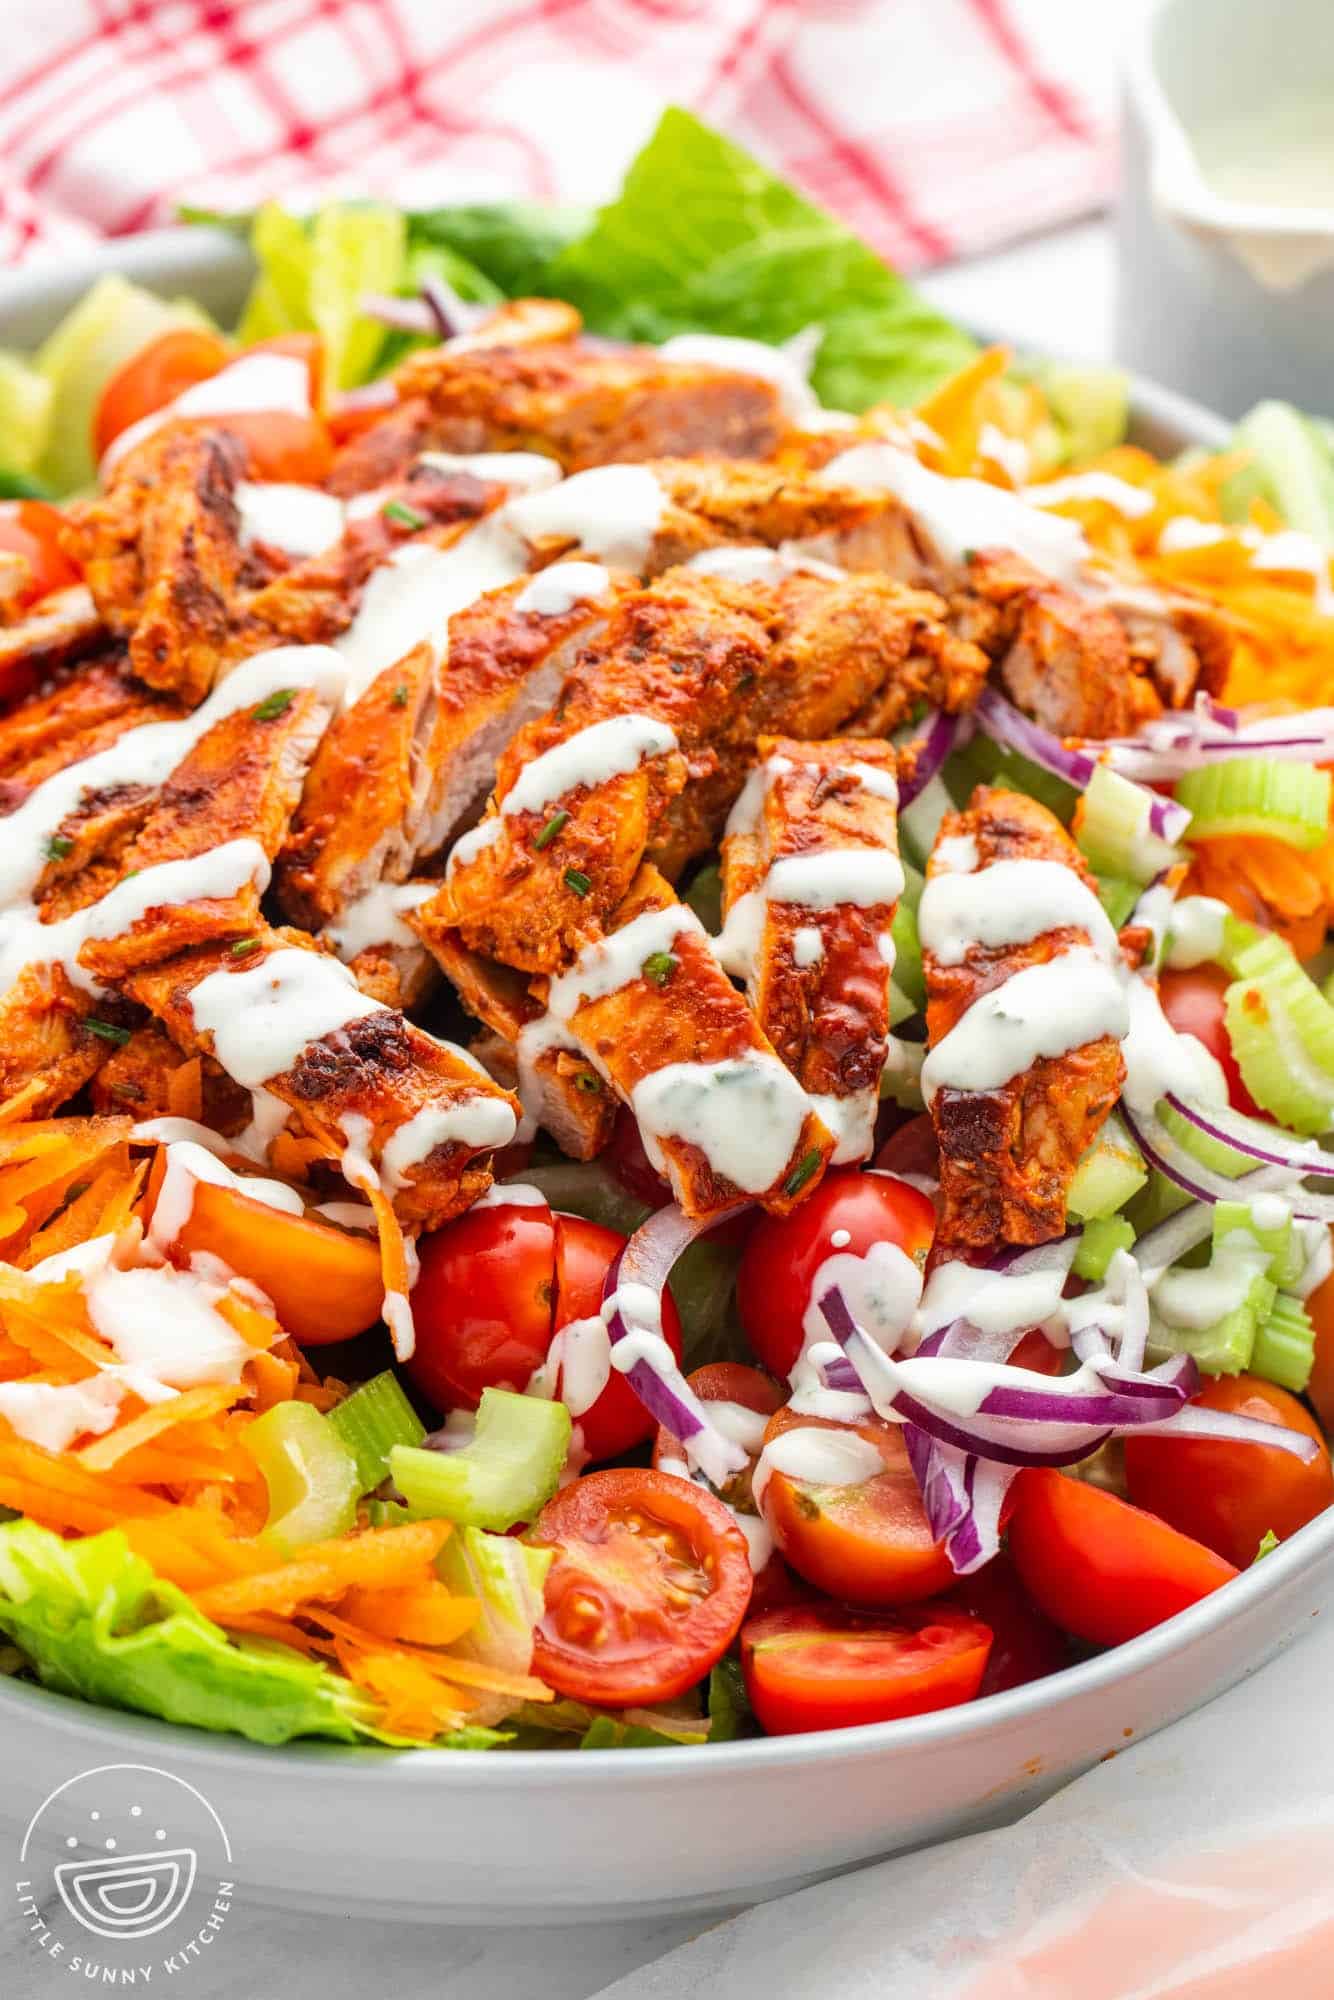 Unbreaded chicken on top of a buffalo chicken salad, drizzled with ranch dressing. 